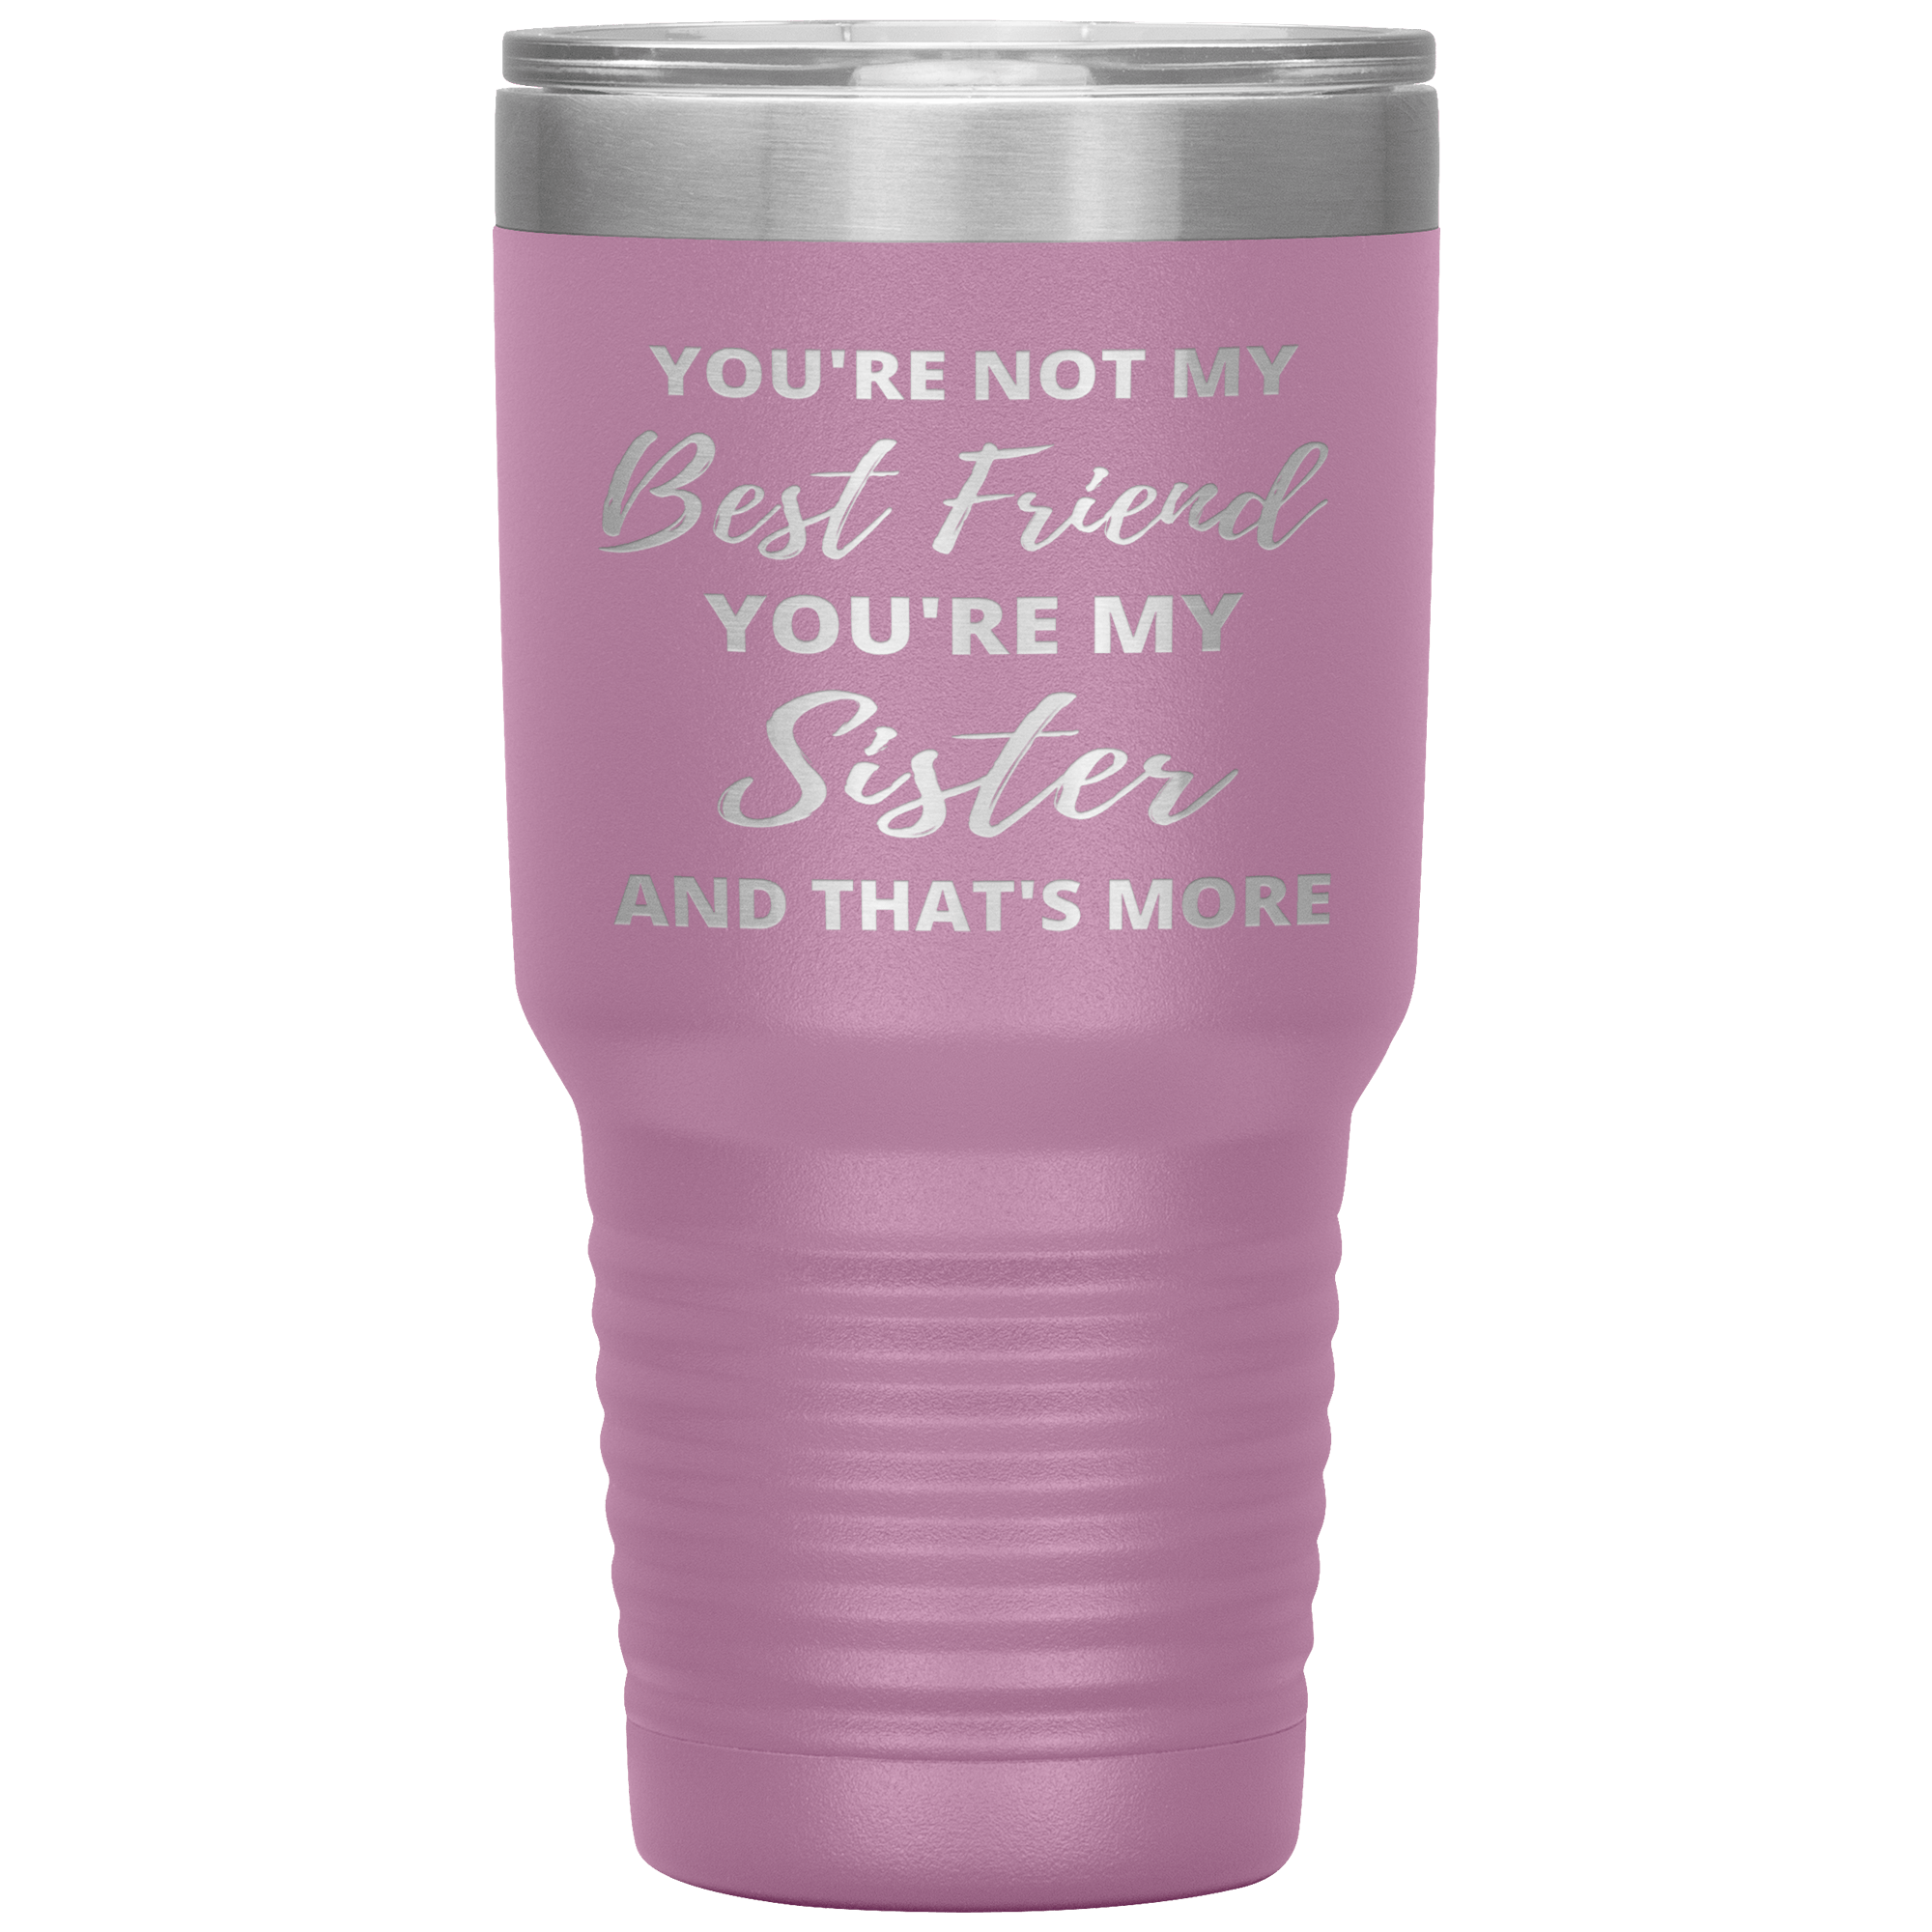 "YOU'RE NOT MY BEST FRIEND YOU'RE MY SISTER" TUMBLER